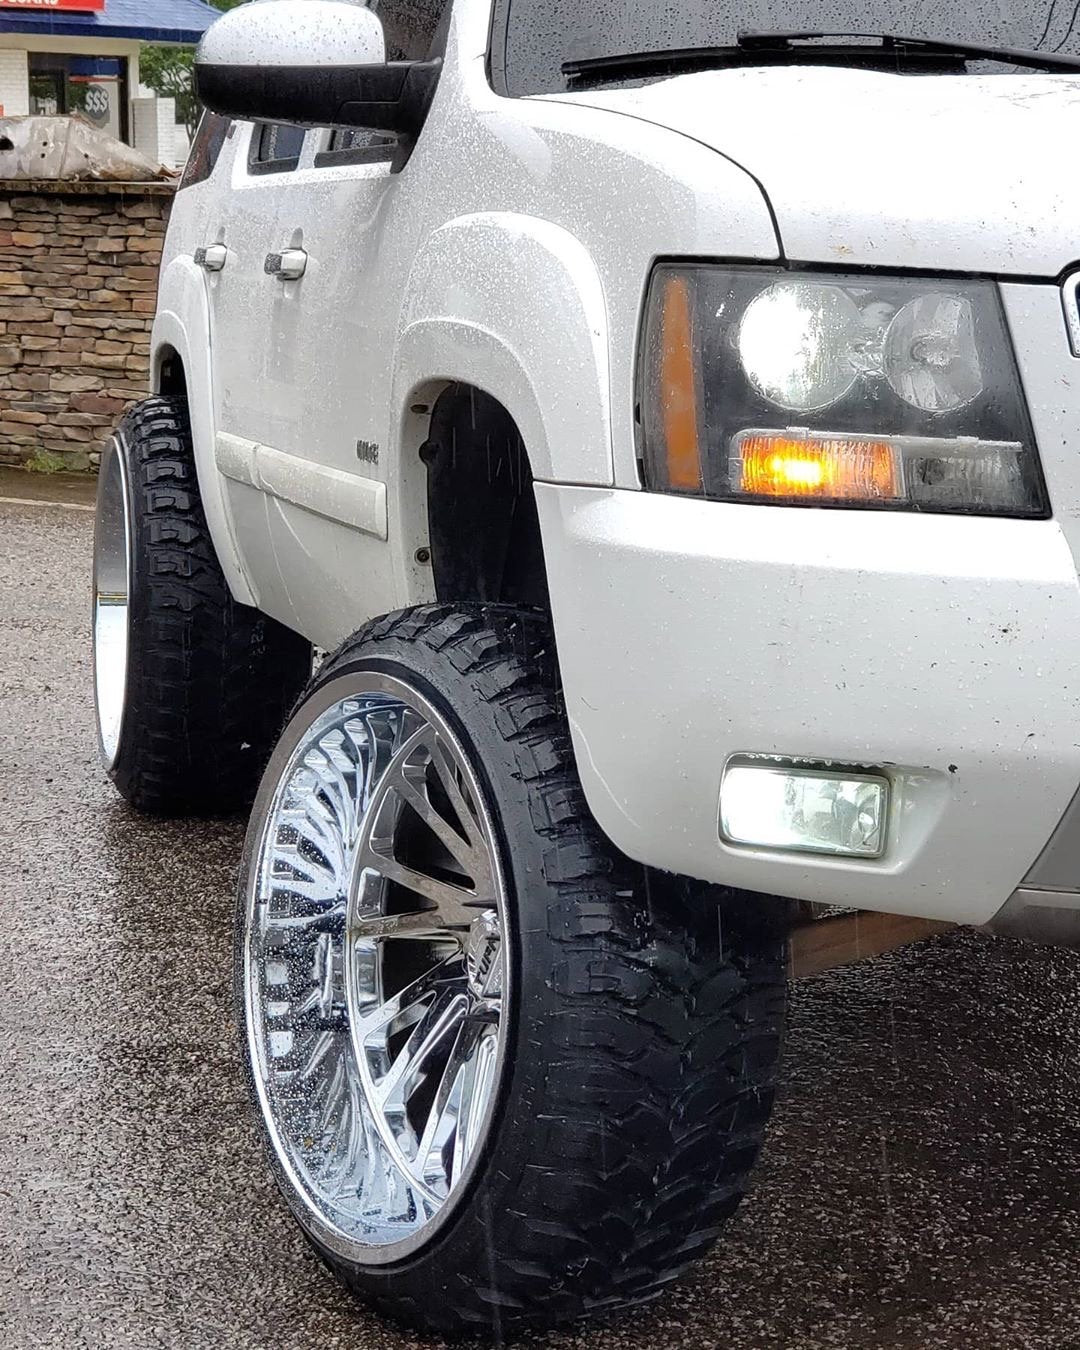 2007 Chevy Tahoe 4x4 Packages - Tires and Engine Performance